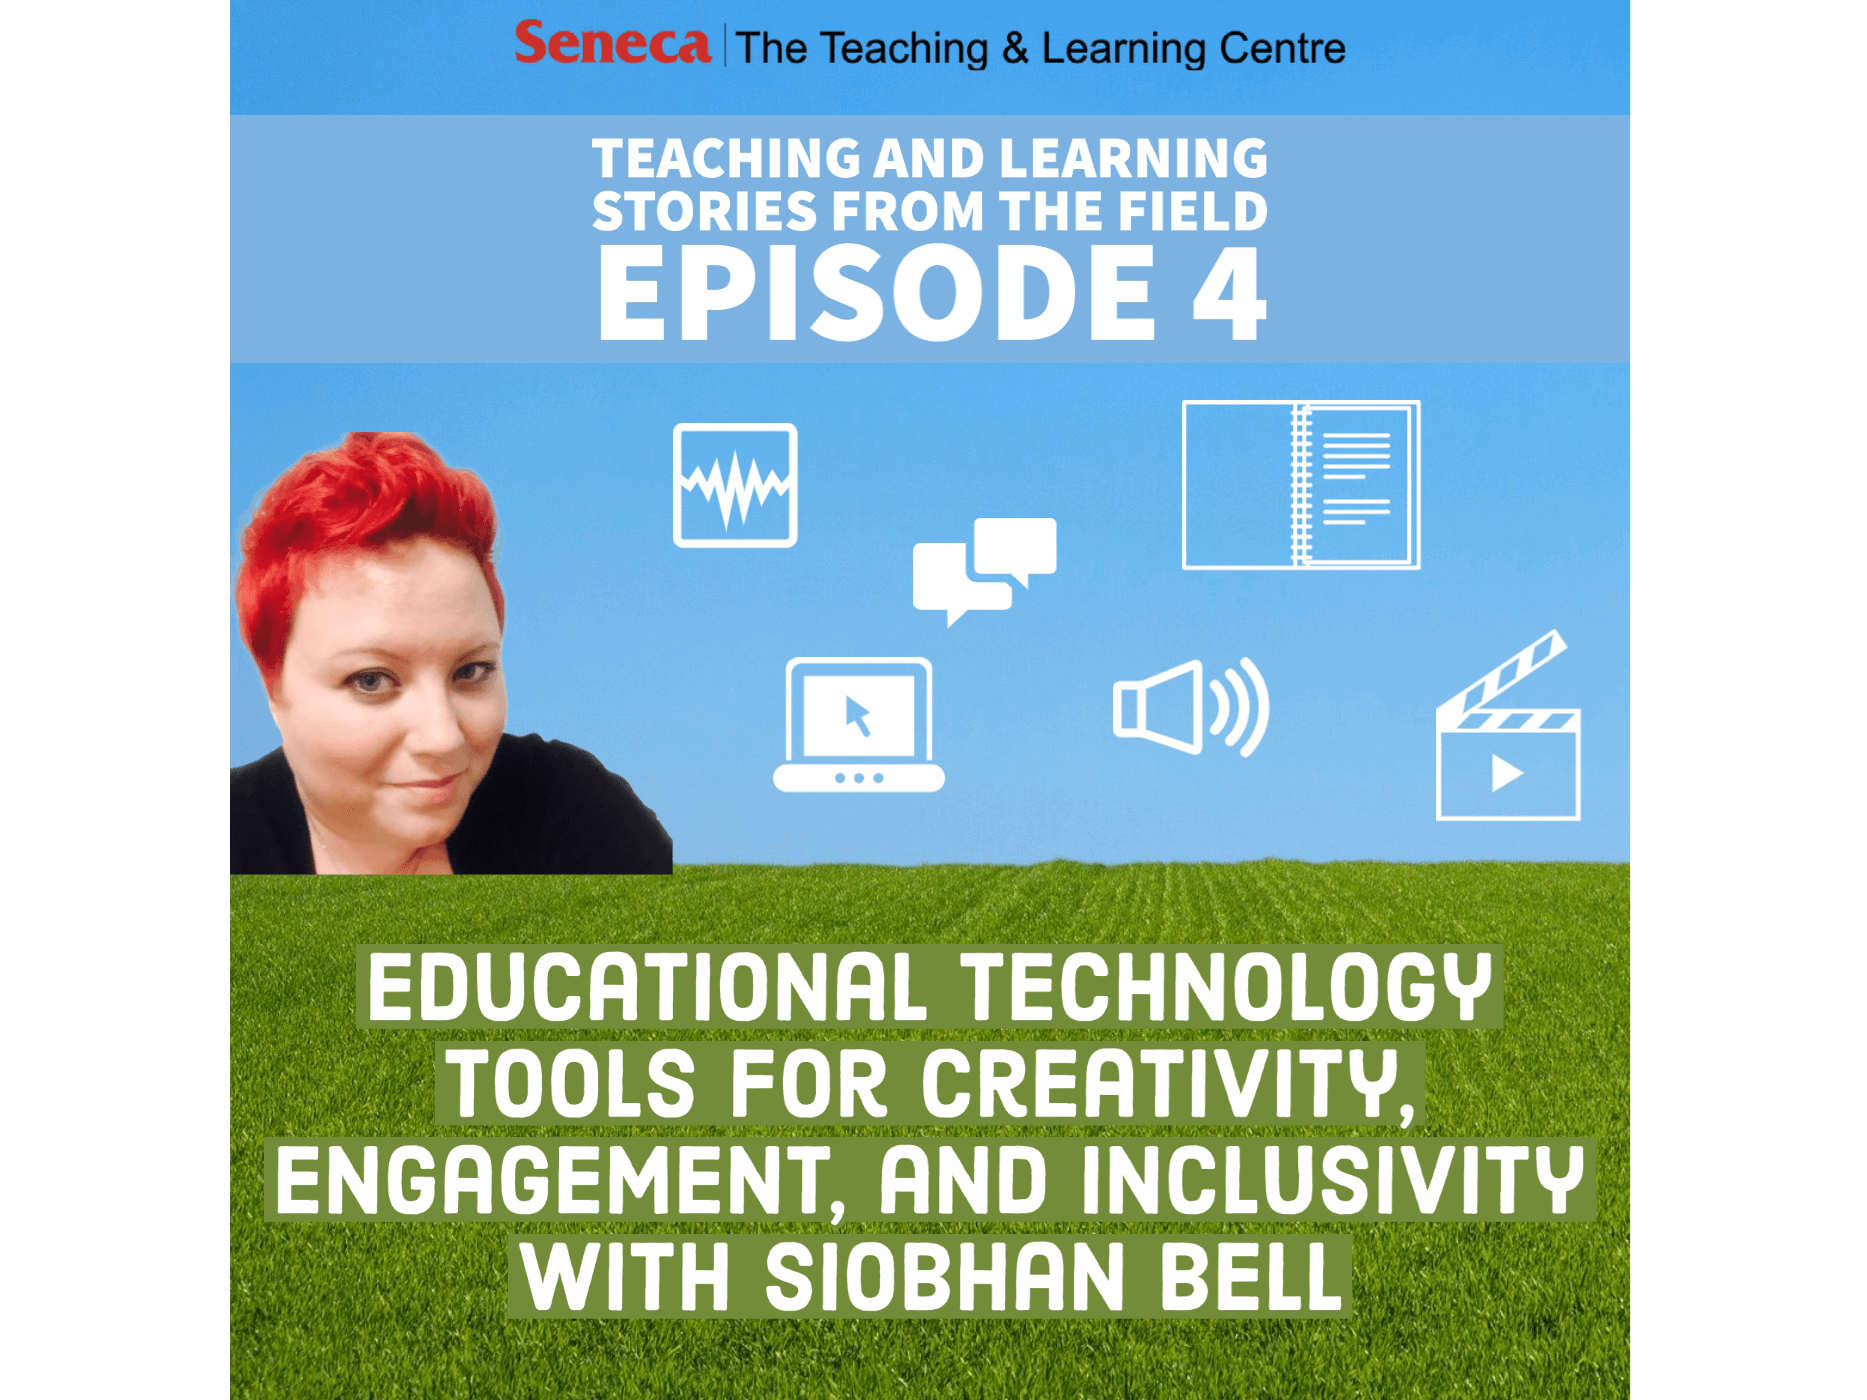 Educational Technology Tools to Improve Engagement, Creativity, and Inclusivity